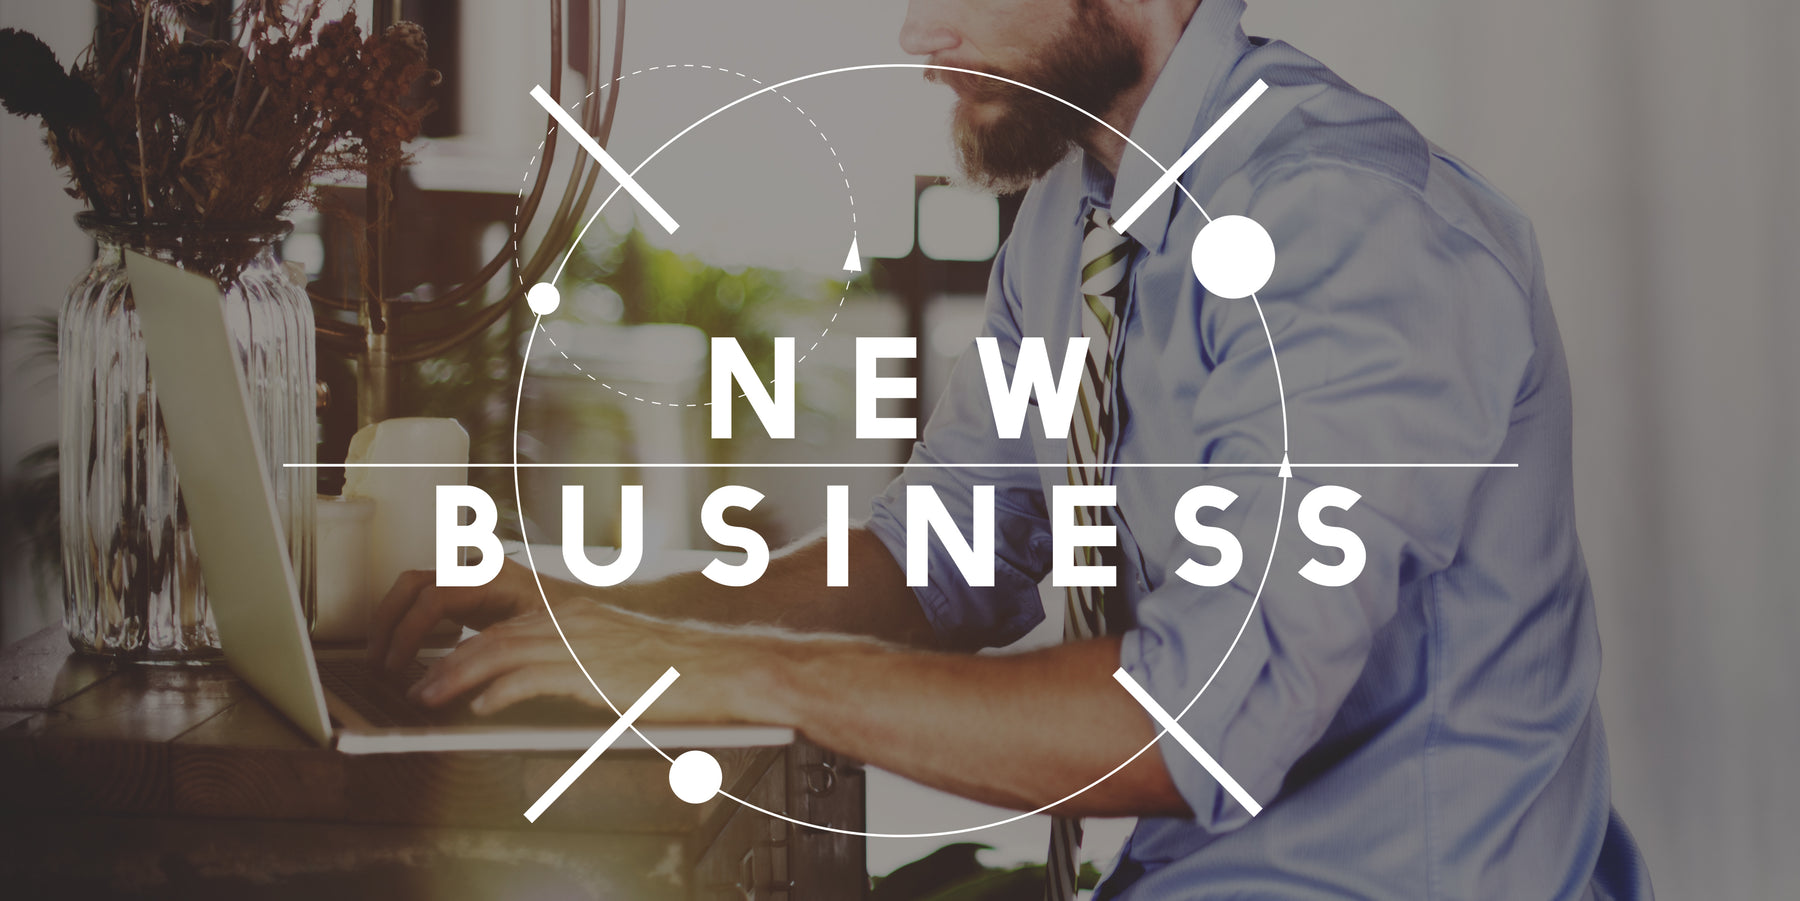 The Best New Business Ideas in Australia